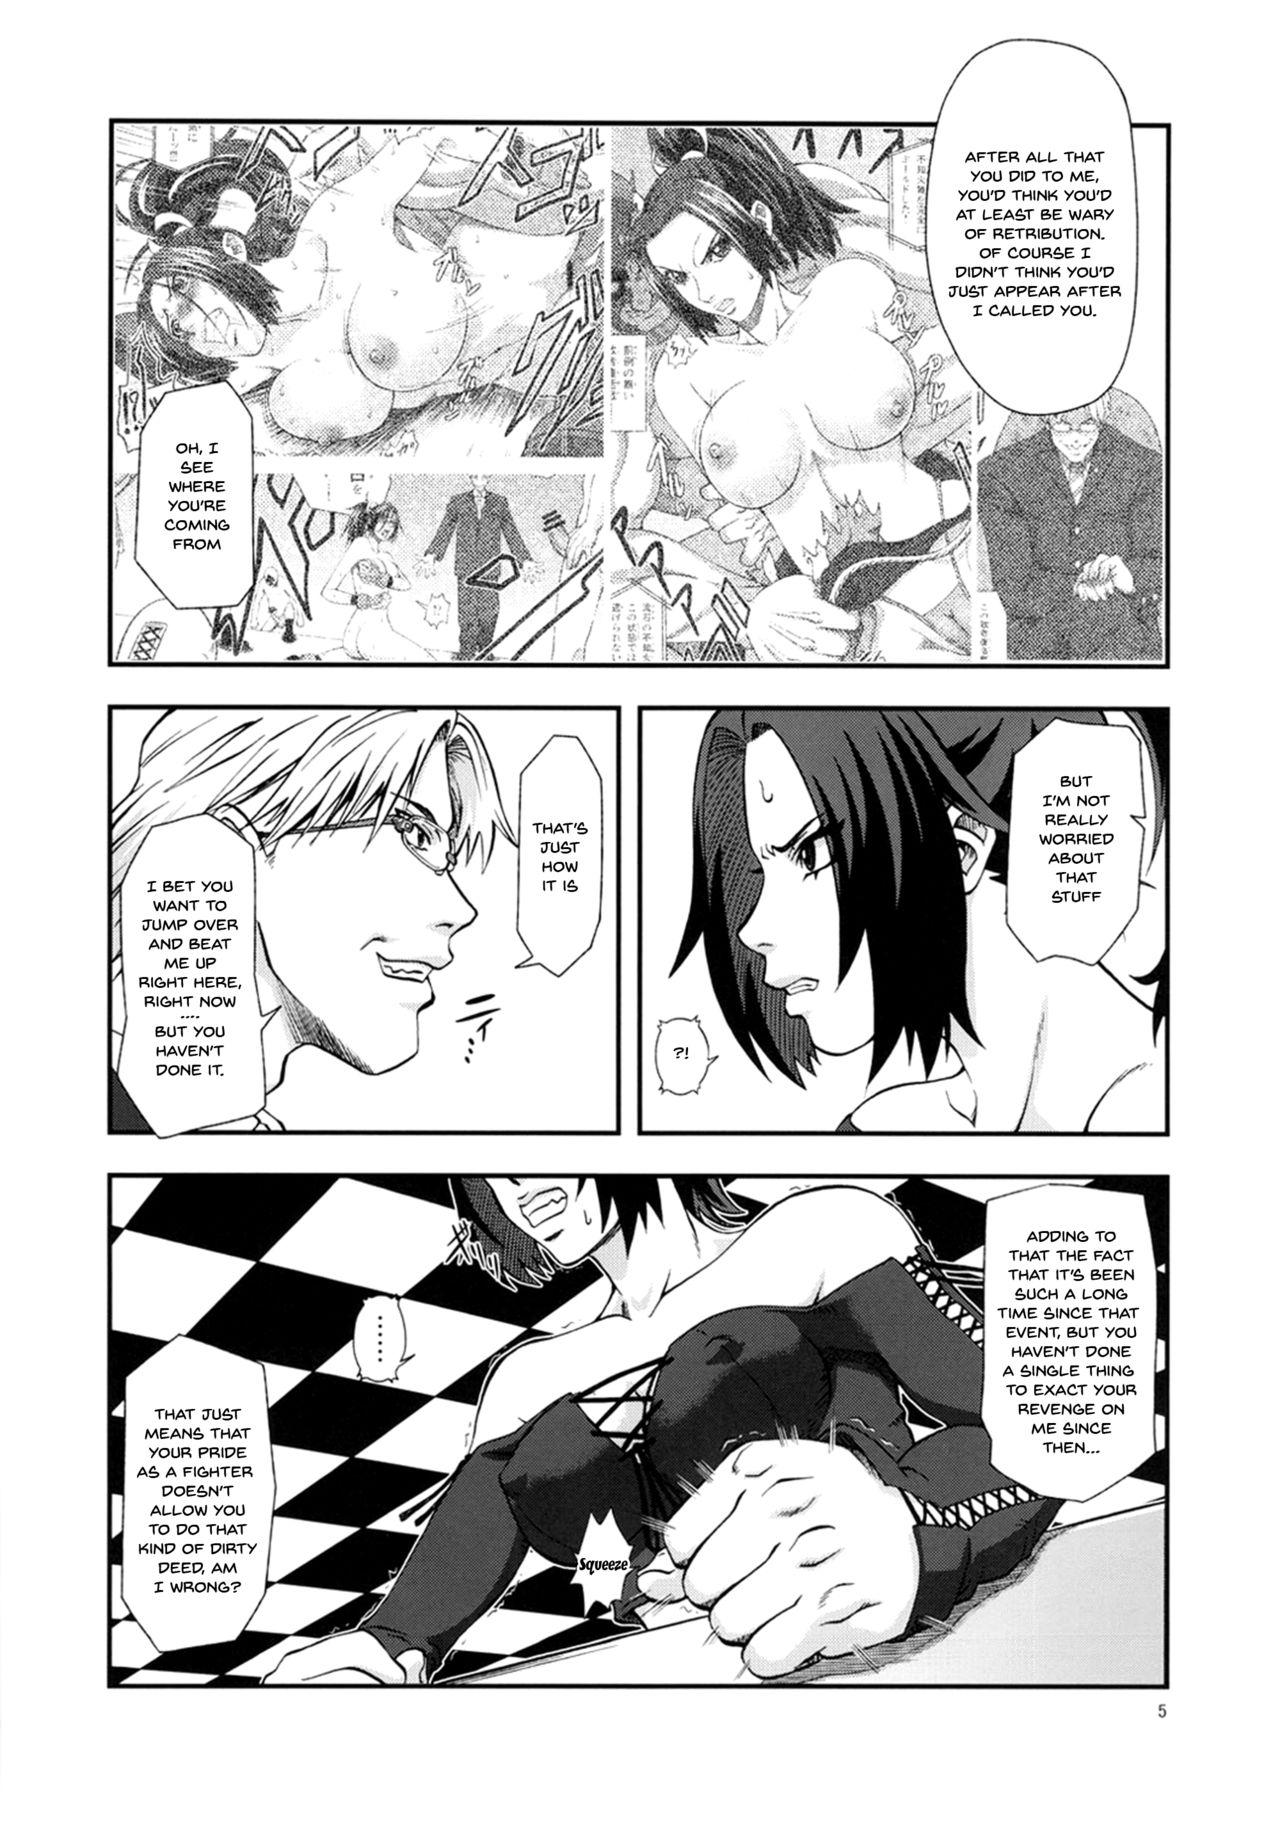 Outdoor Sex Shiranui Muzan 3 - King of fighters Homosexual - Page 4